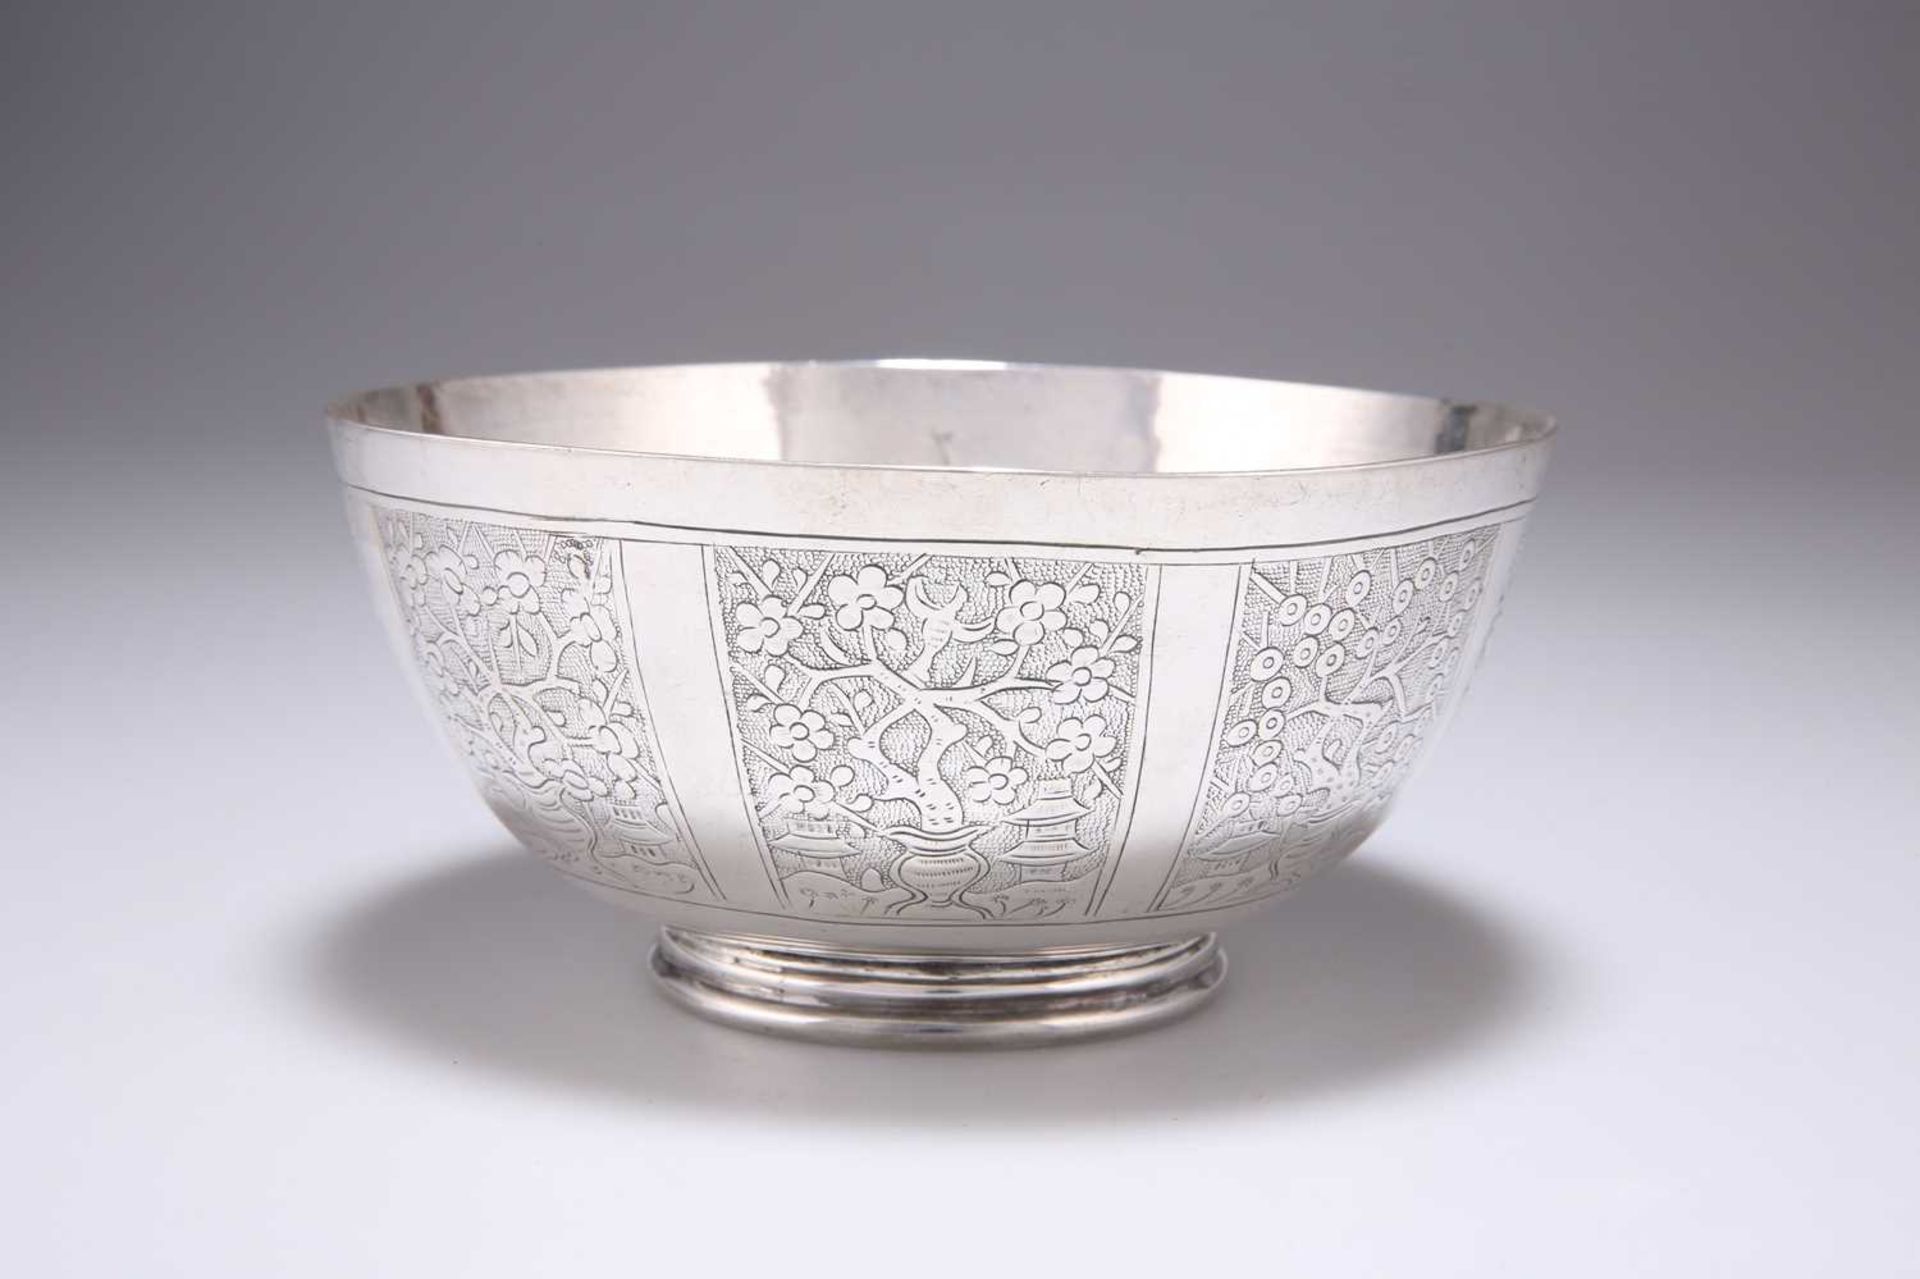 AN EARLY 19TH CENTURY CHINESE SILVER BOWL